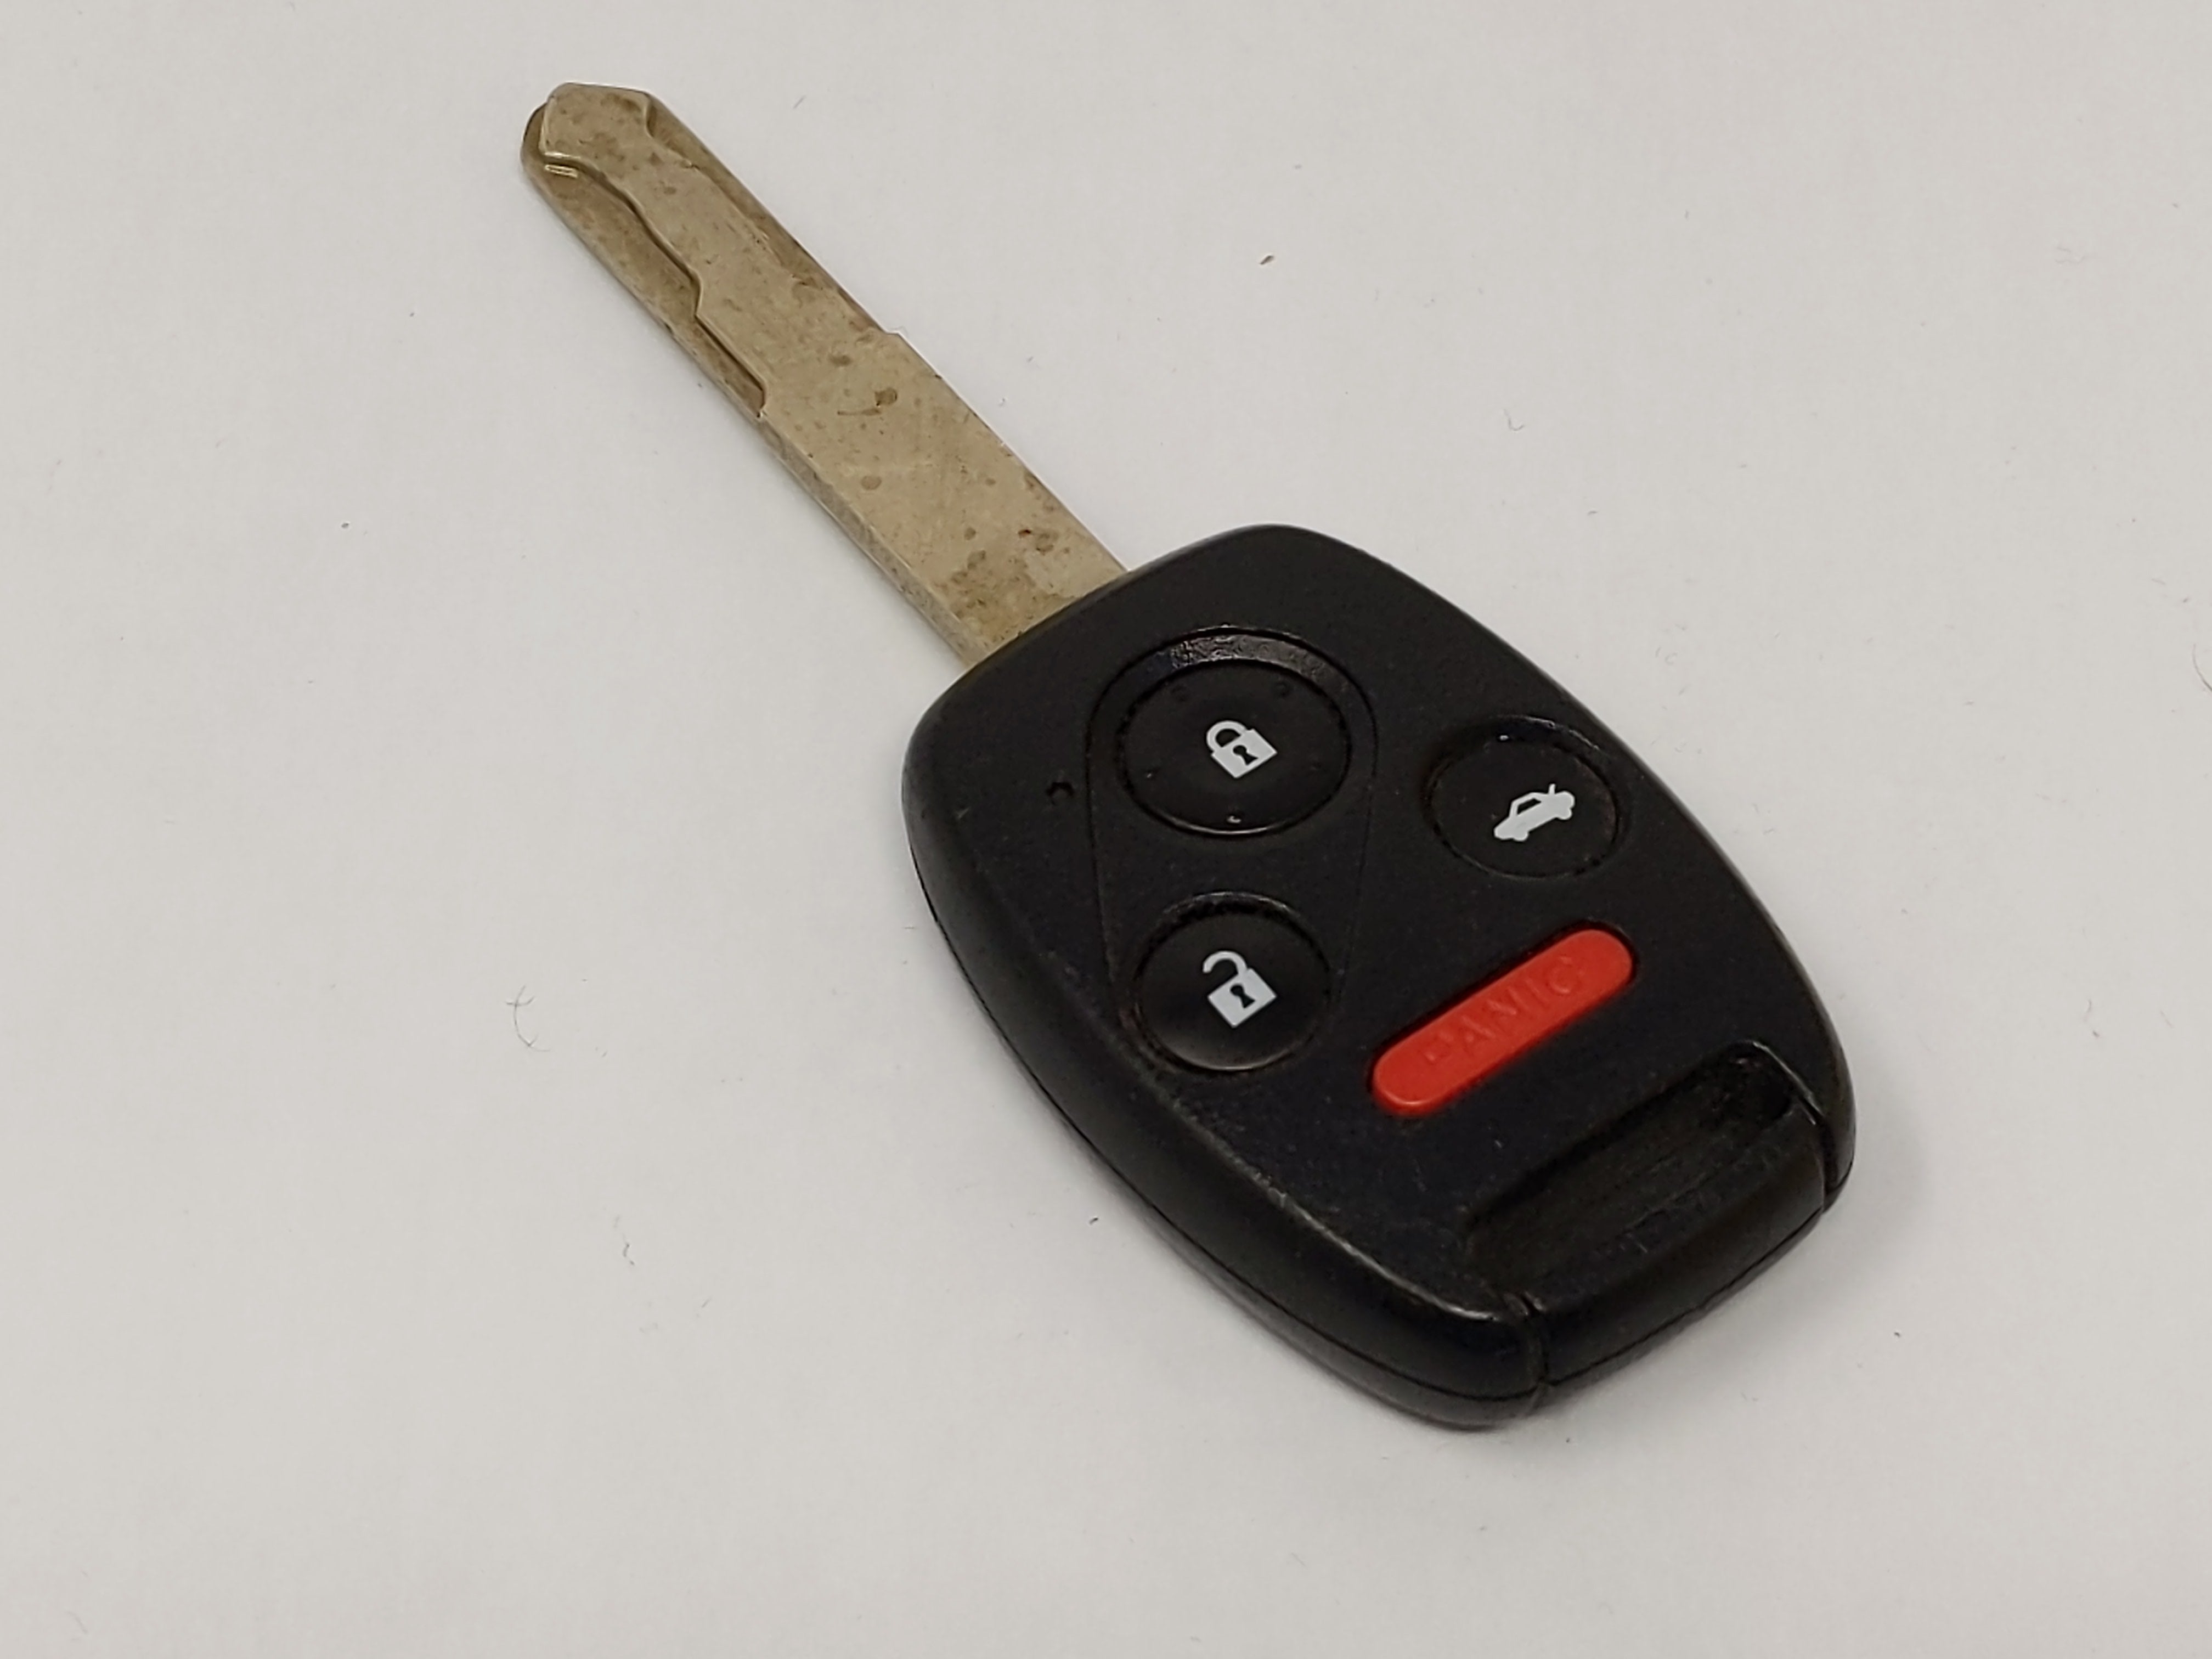 2003-2007 Honda Accord Keyless Entry Remote Oucg8d-380h-A 4 Buttons Car - Oemusedautoparts1.com